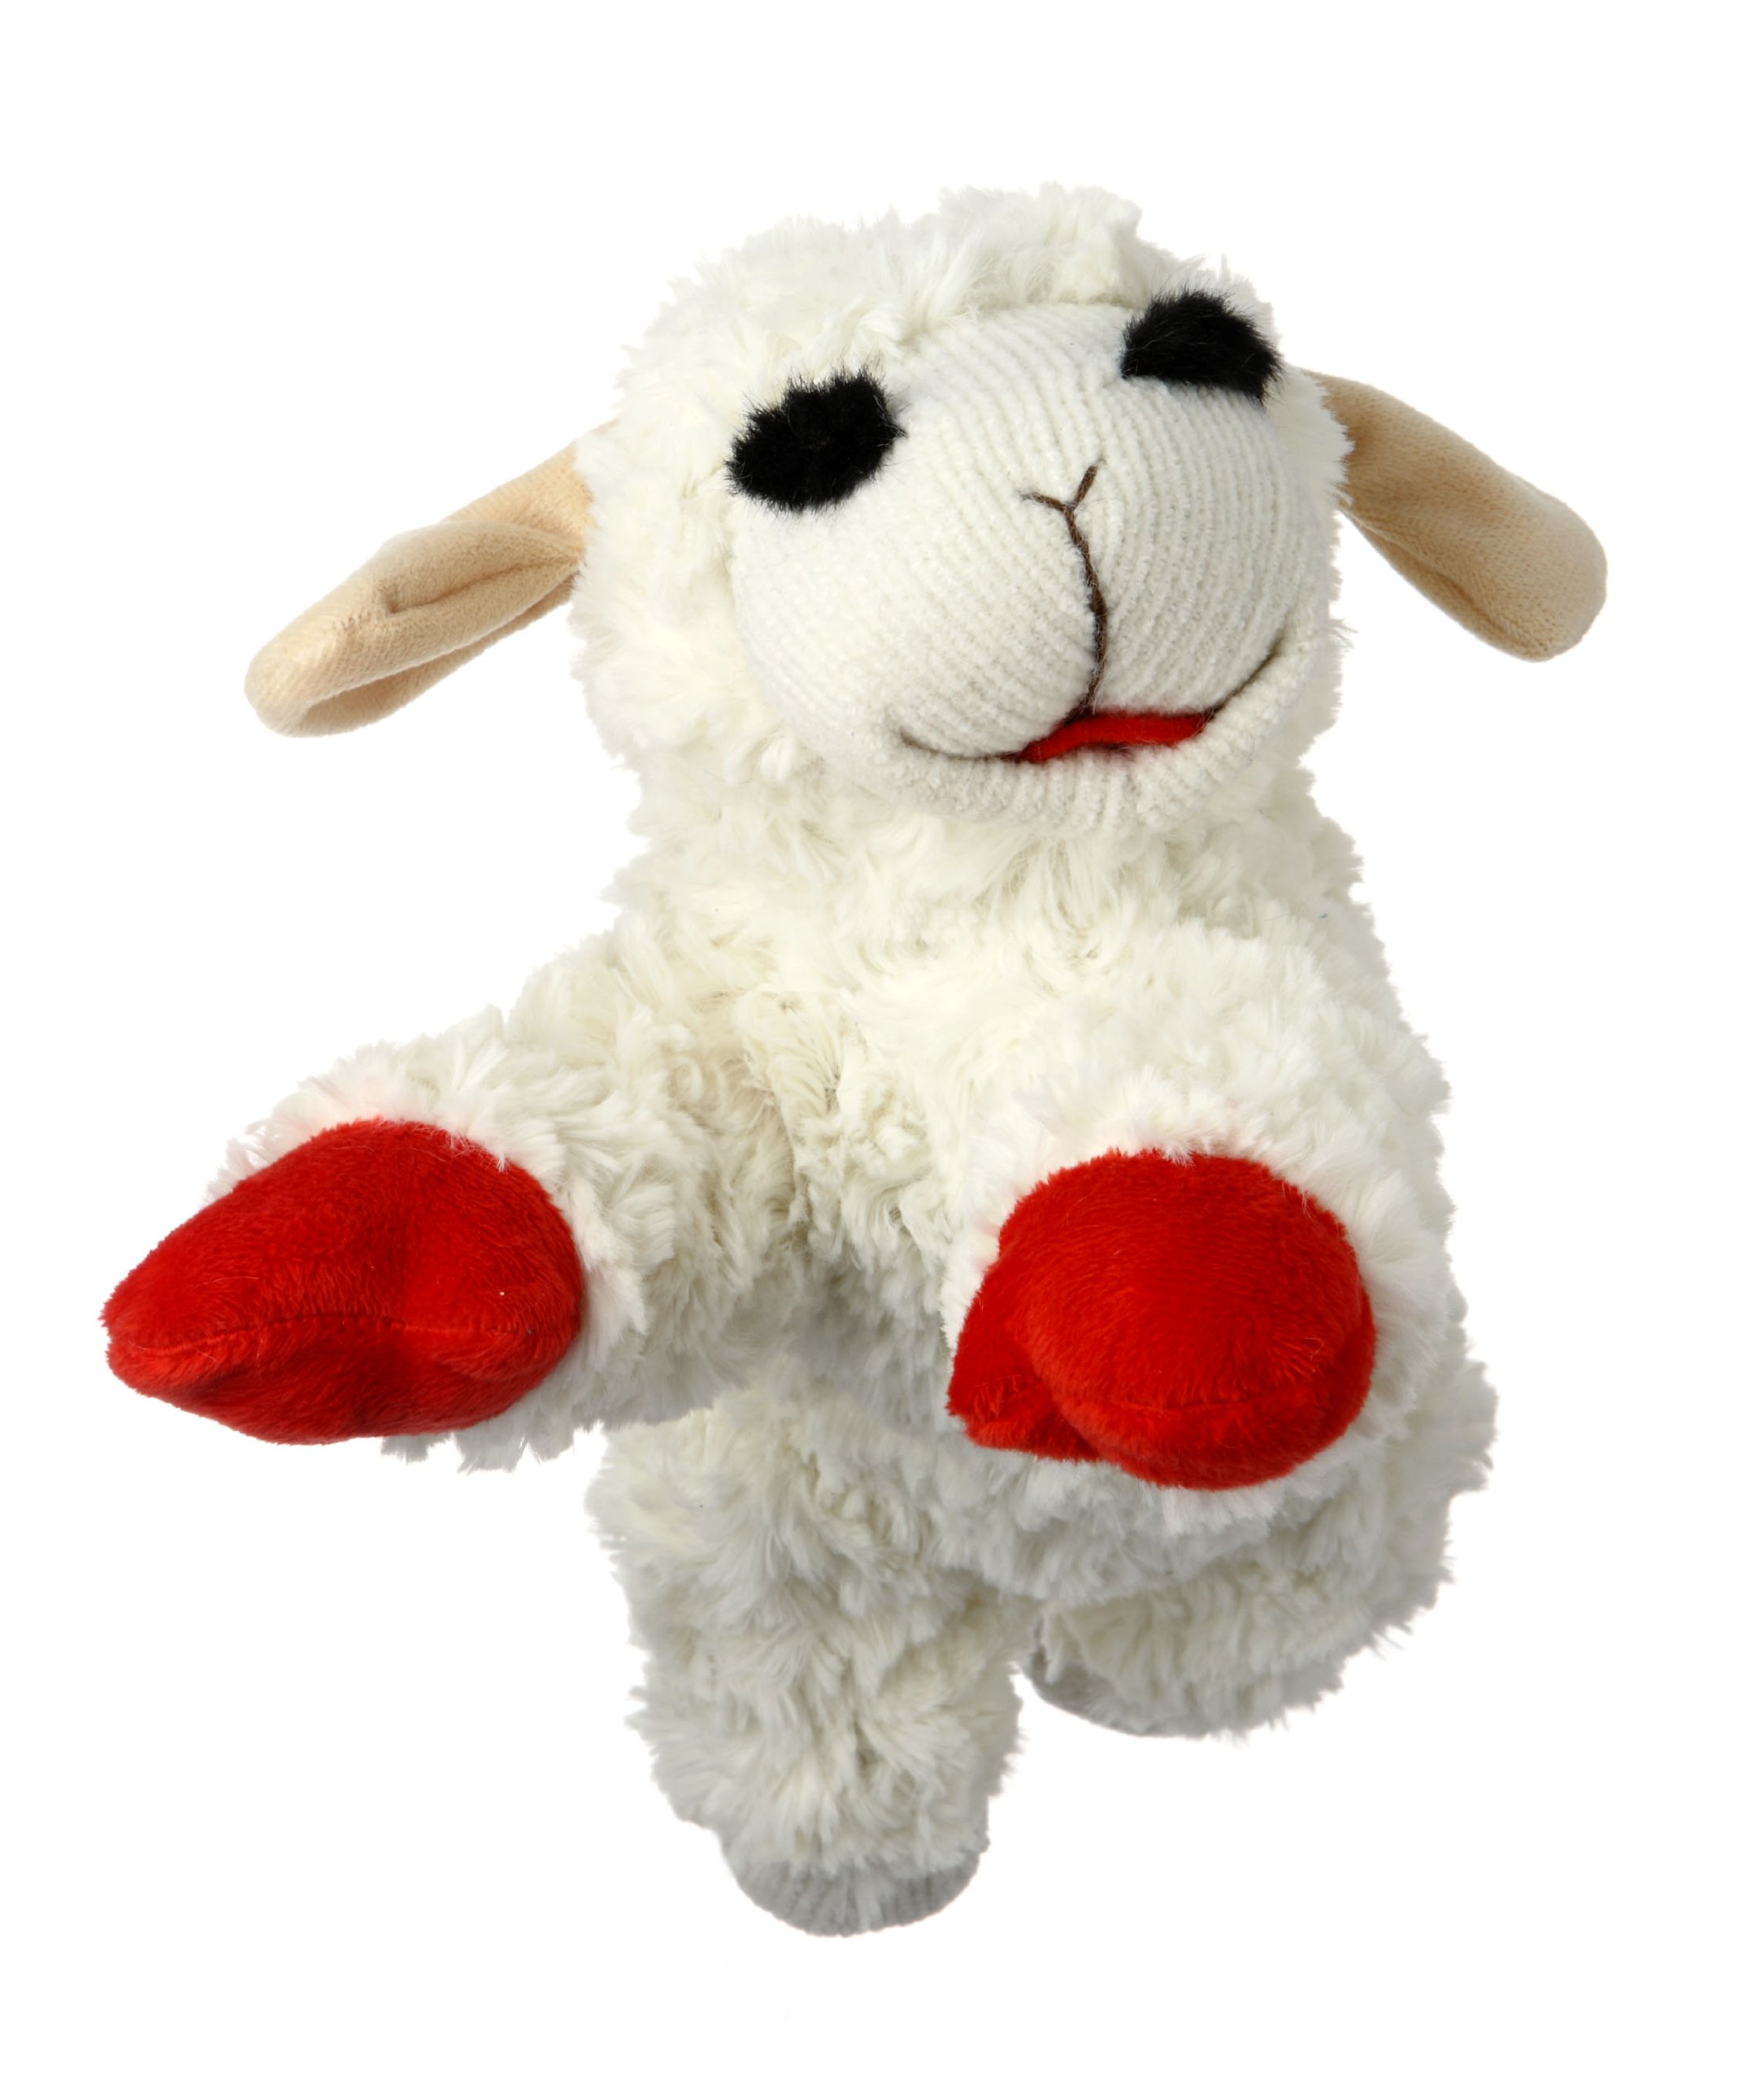 10" Multipet Lambchop Plush Squeaker Dog Toy $4 + Free Shipping w/ Prime or on $25+